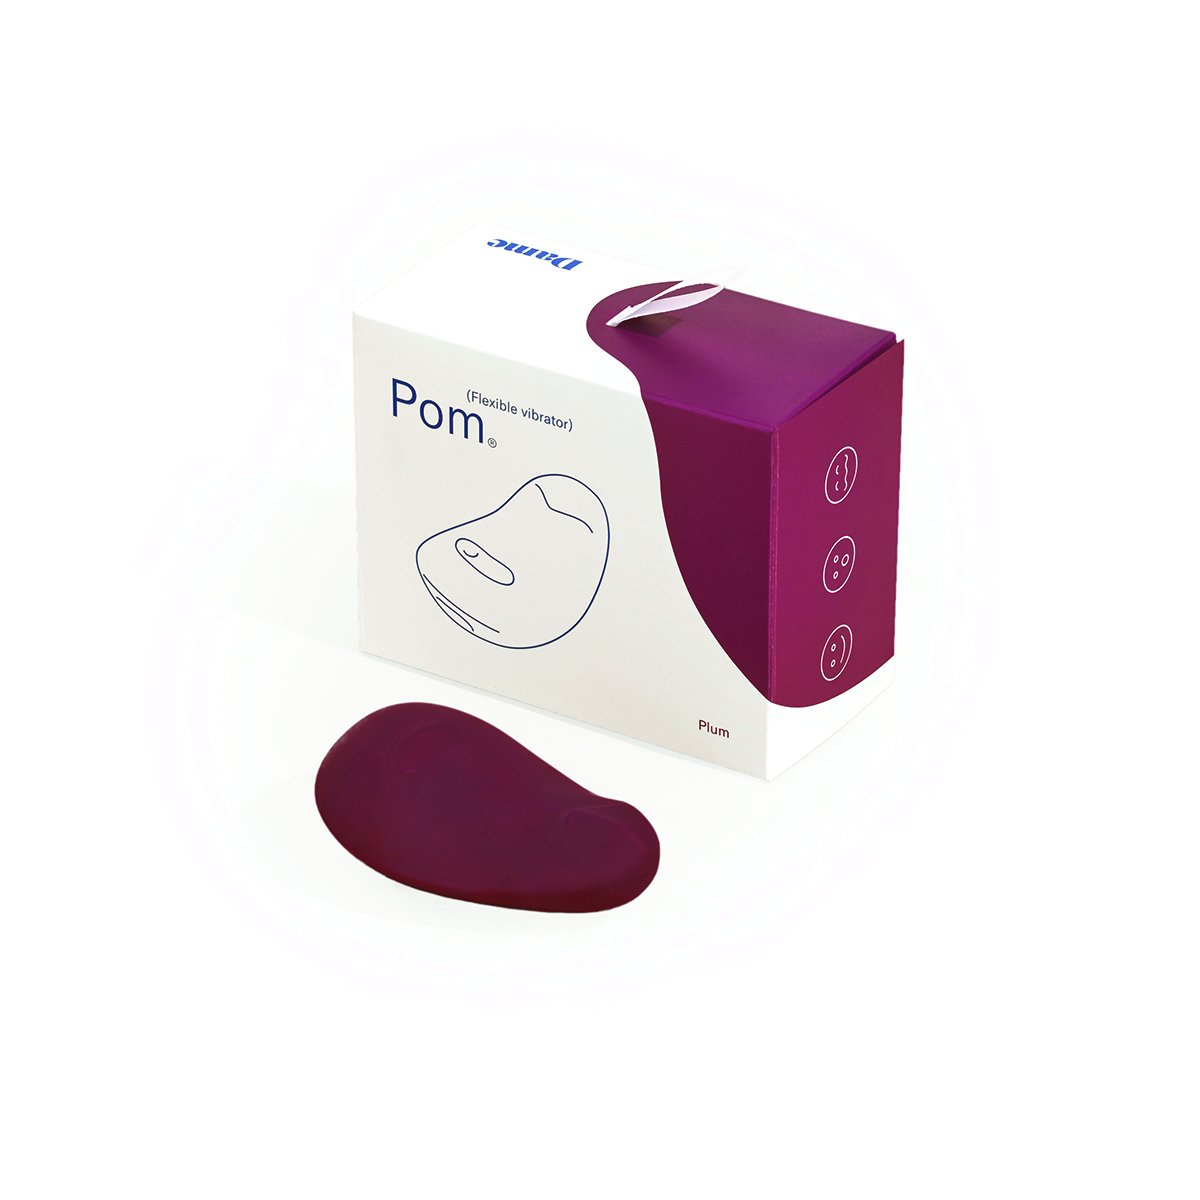 Dame Products Pom - Buy At Luxury Toy X - Free 3-Day Shipping